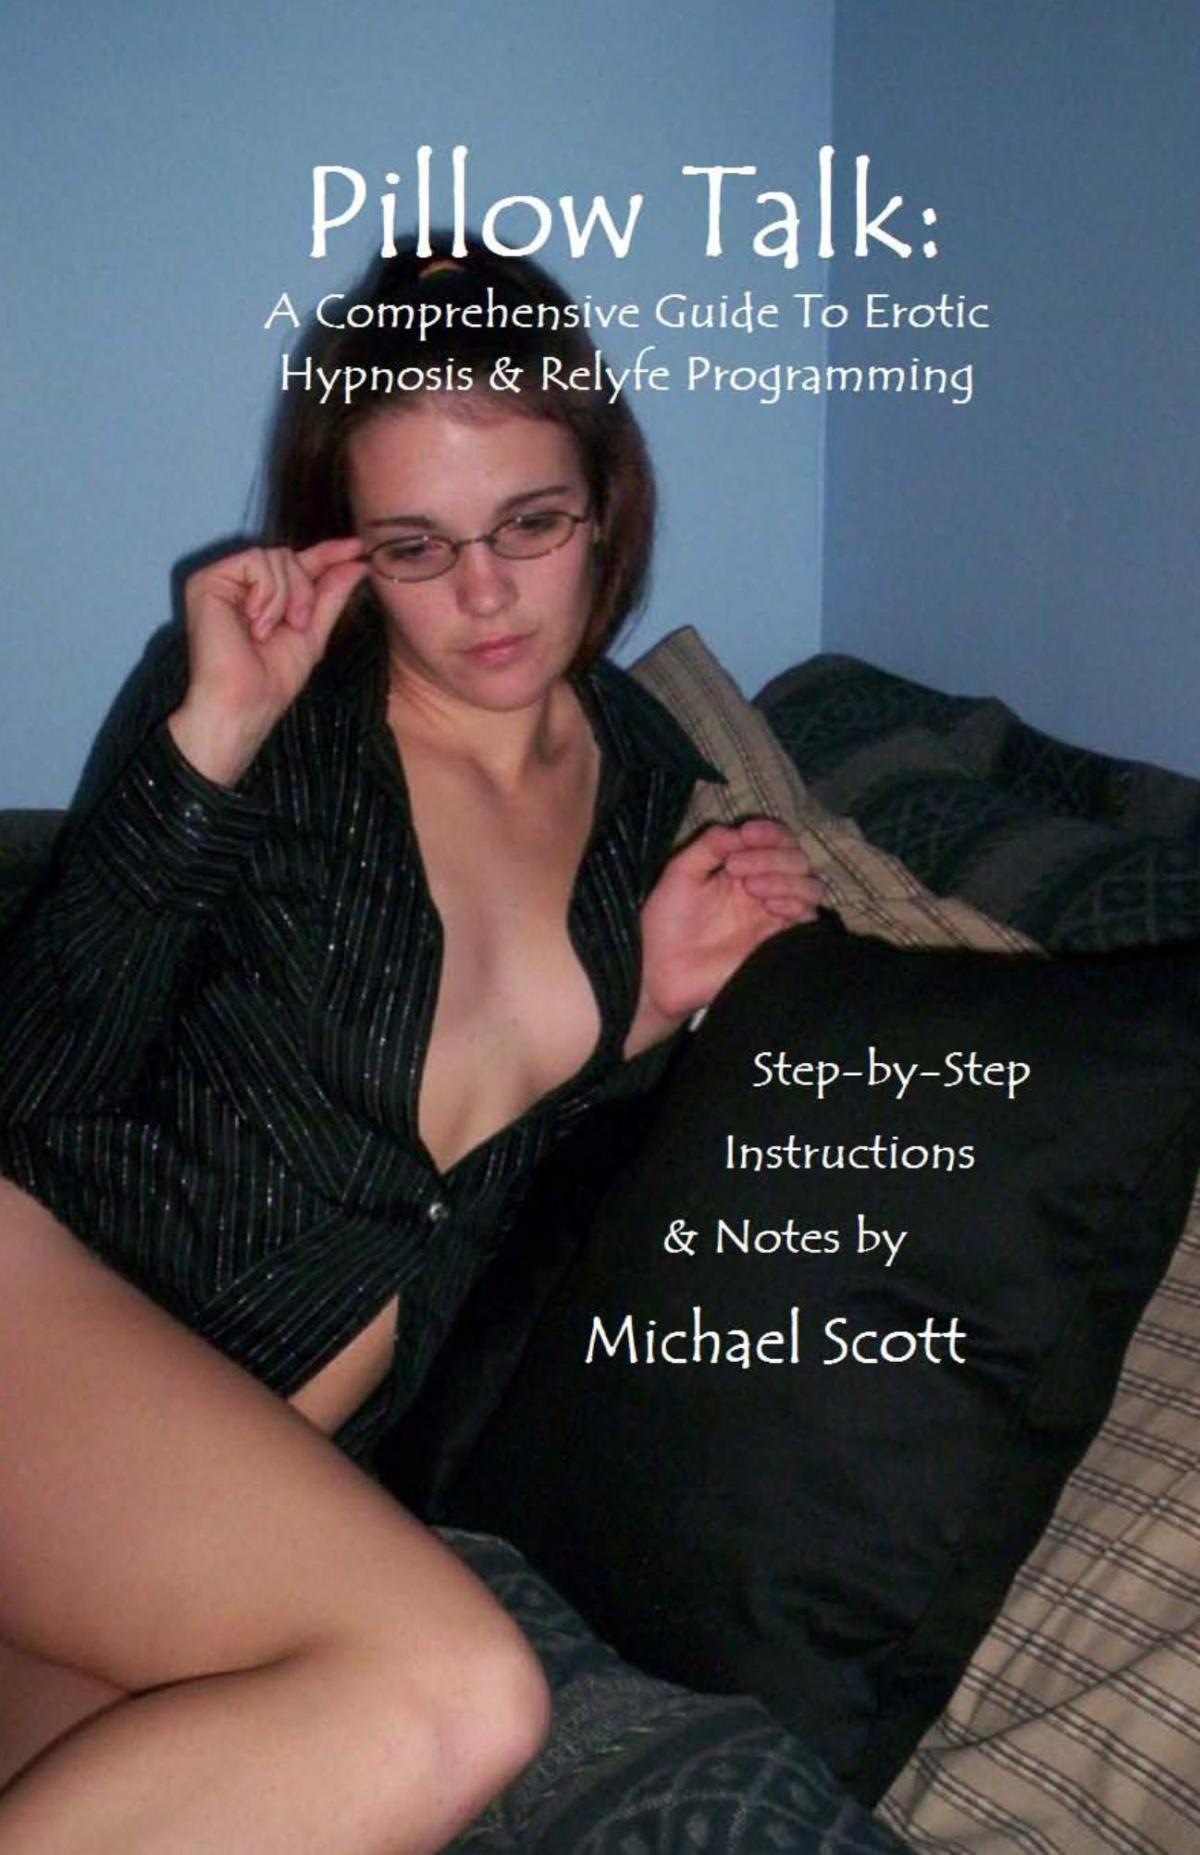 Xaxis Talks Erotic Hypnosis, Its Risks And Rewards With Author Michael Scott